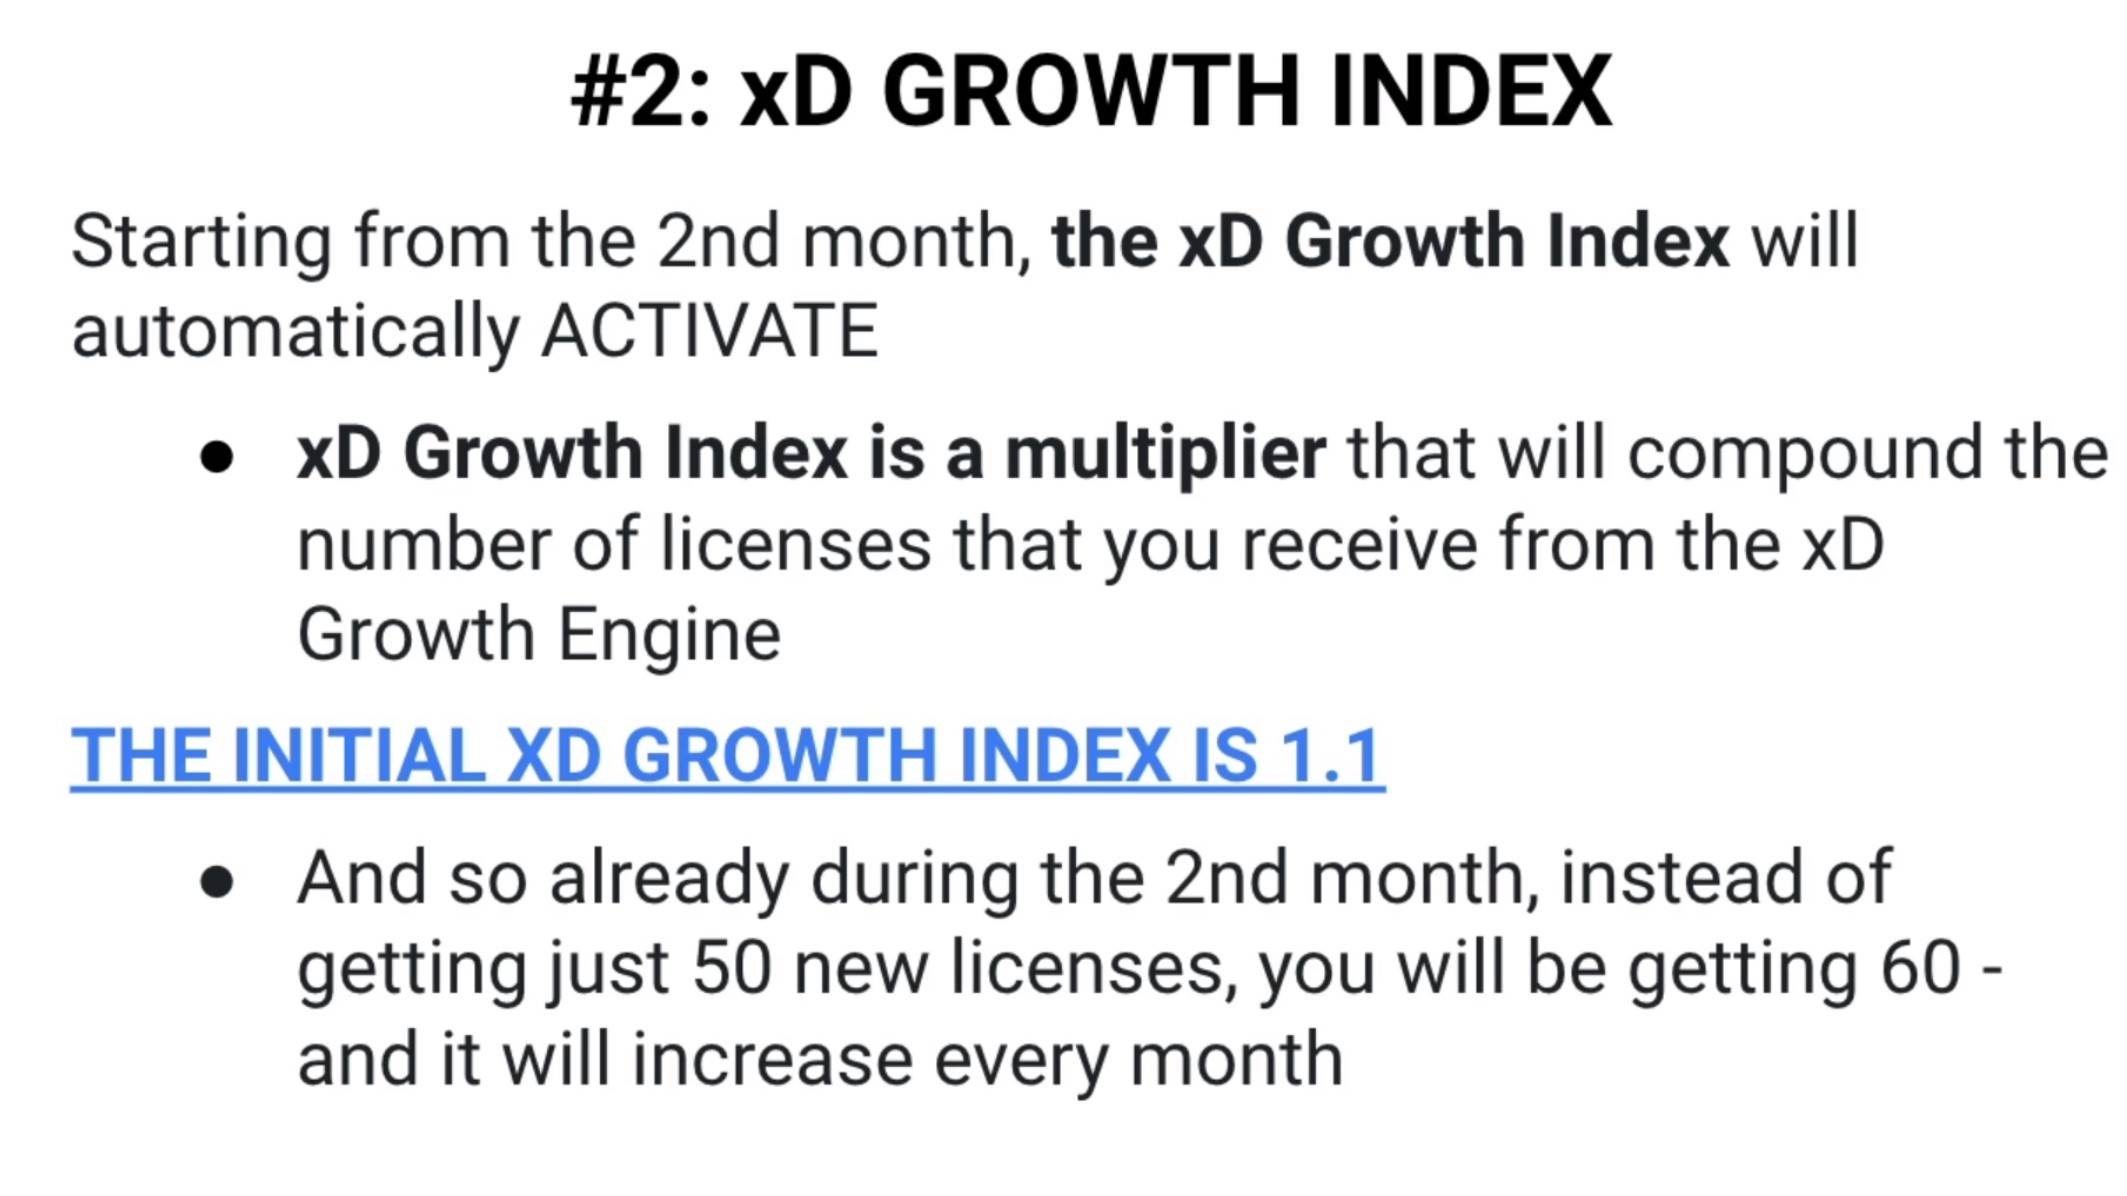 #2: xD Growth Index compounds number of licences